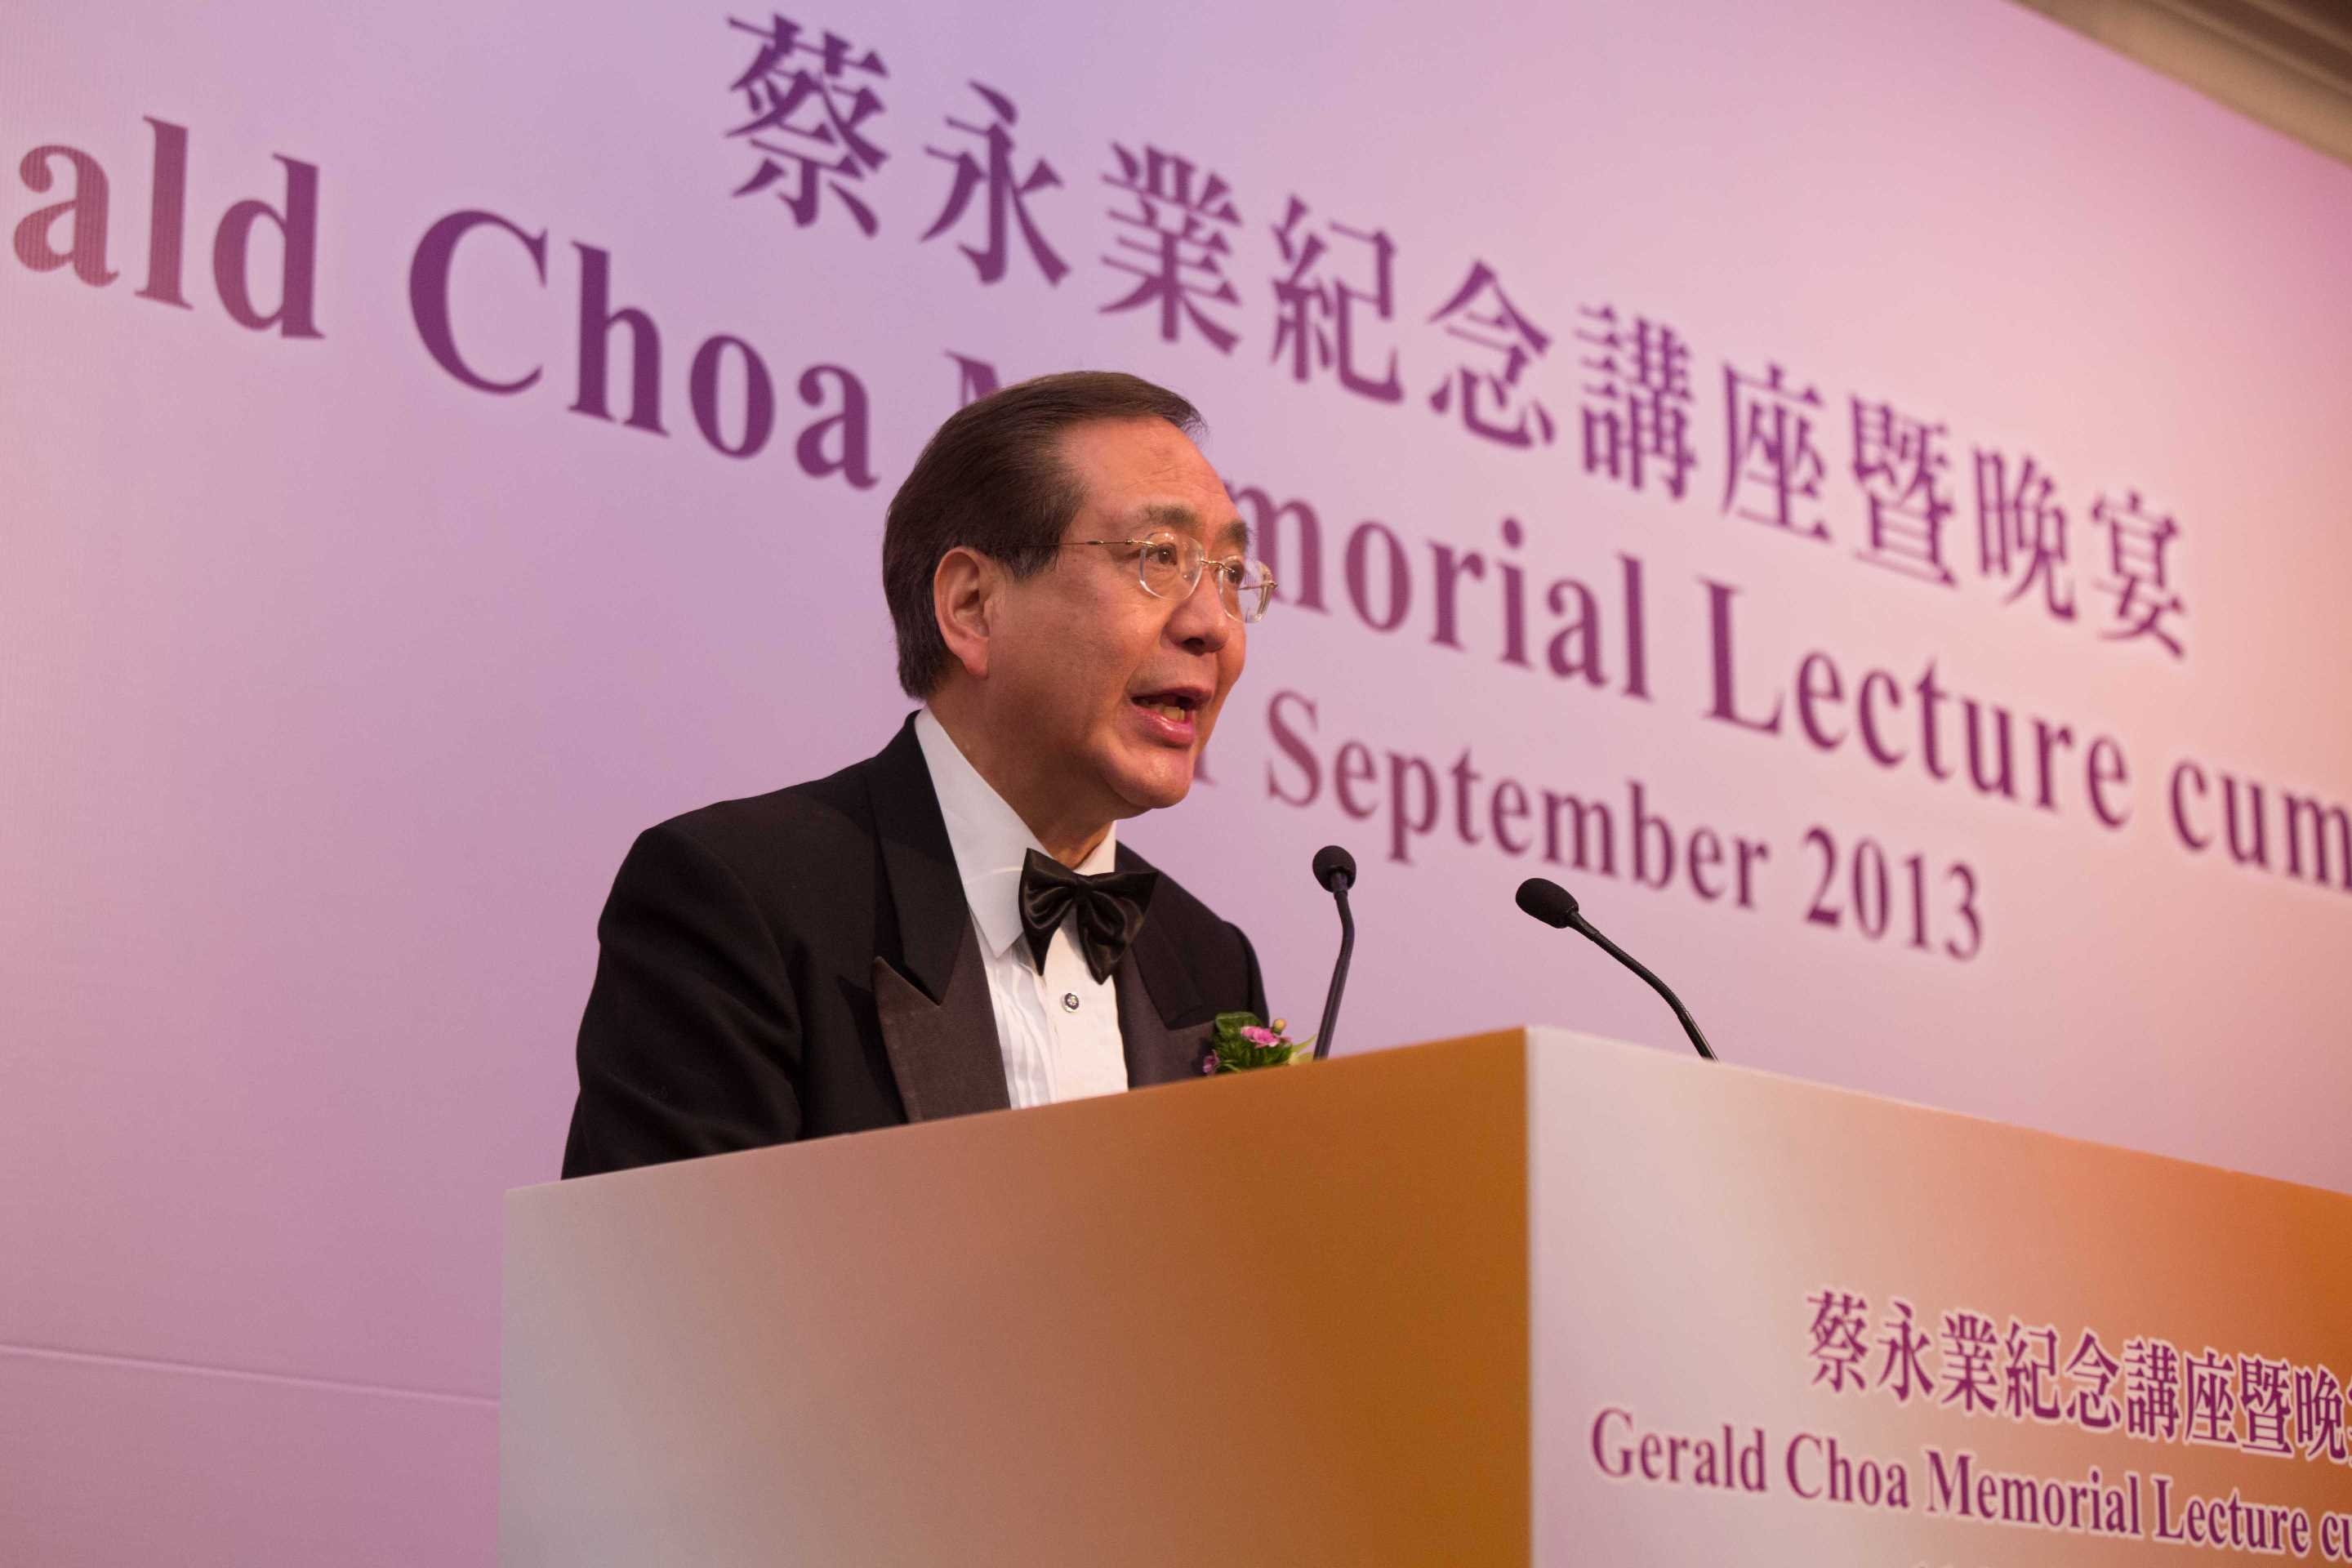 Prof. the Honourable Arthur K.C. Li, Member of the Executive Council of HKSAR and Emeritus Professor of Surgery of CUHK, gave a lecture titled ‘Professor Gerald Choa – His Legacy’ in the first ‘Gerald Choa Memorial Lecture’.